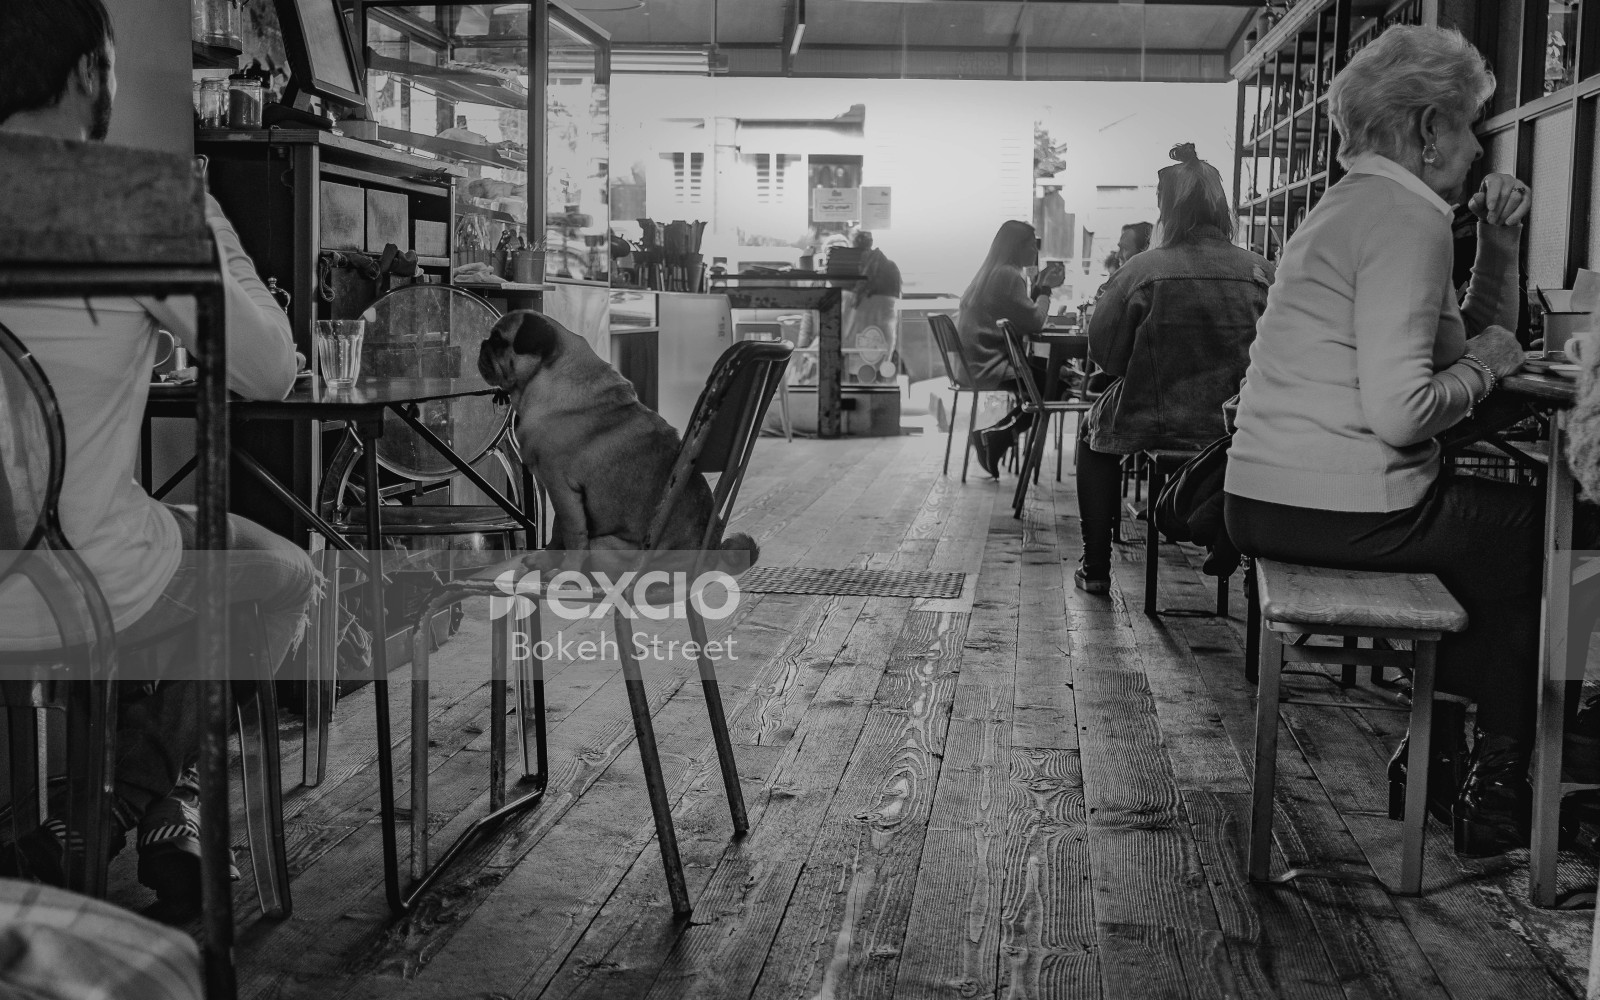 Dog sitting on chair in cafe